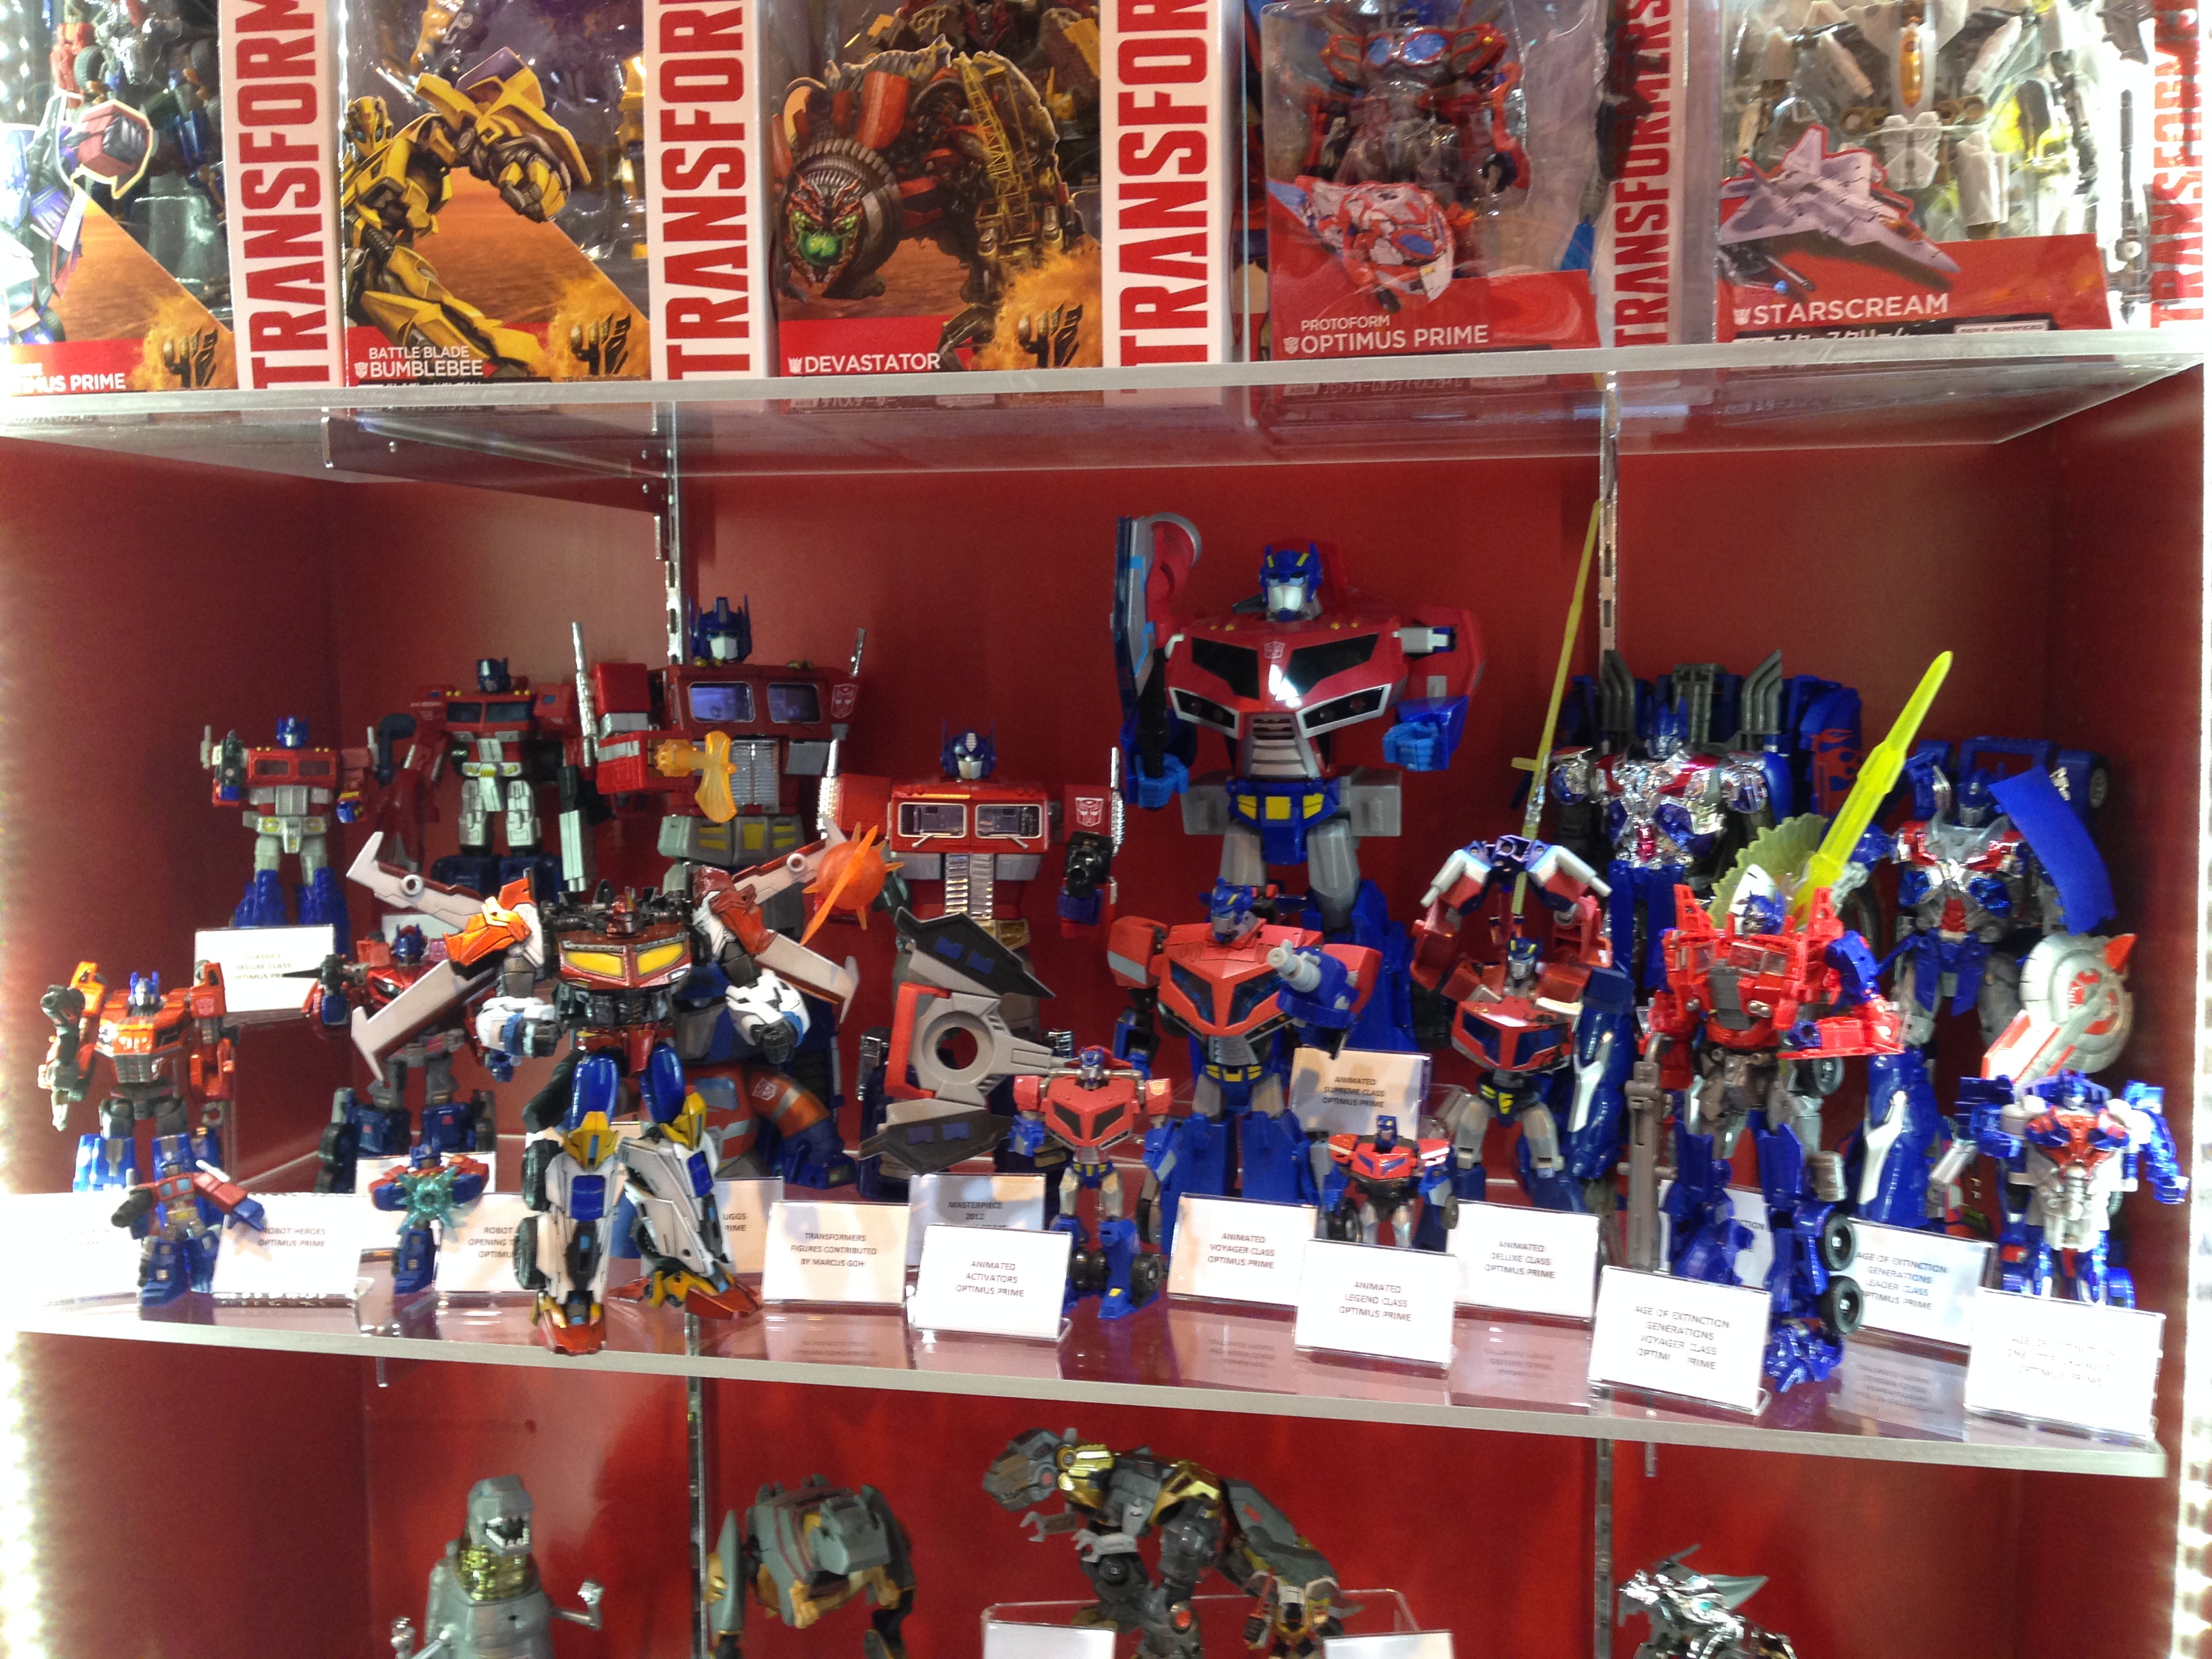 More pictures of Primes.